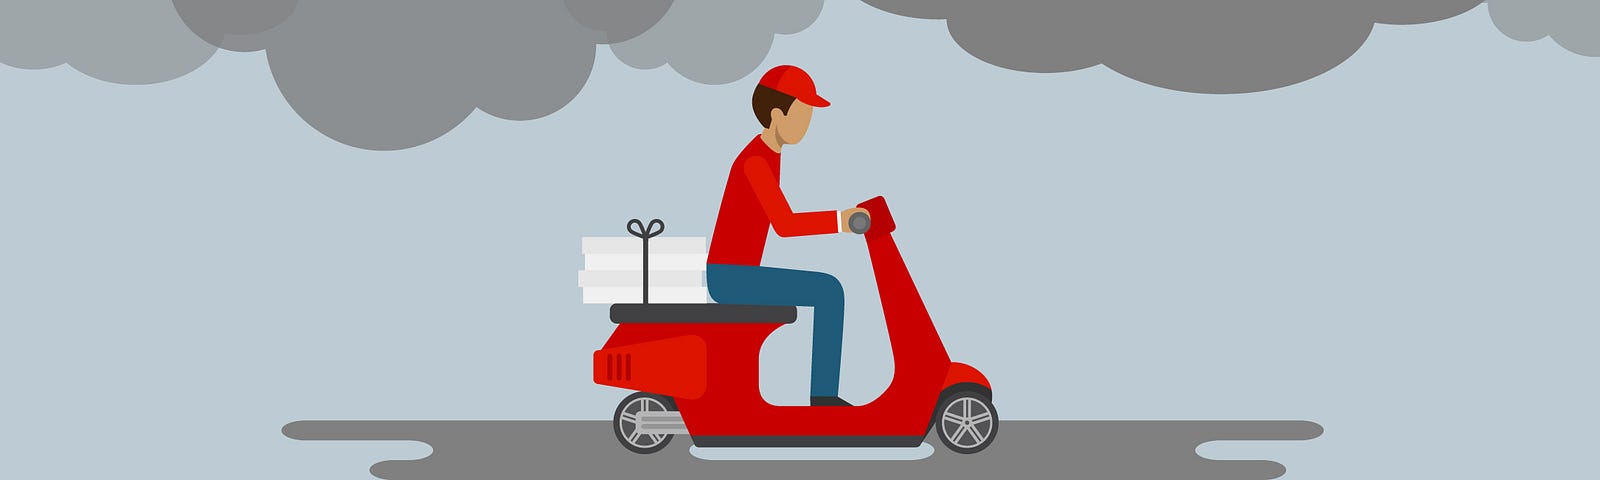 Illustration: Delivery man driving on red scooter on a cloudy day.